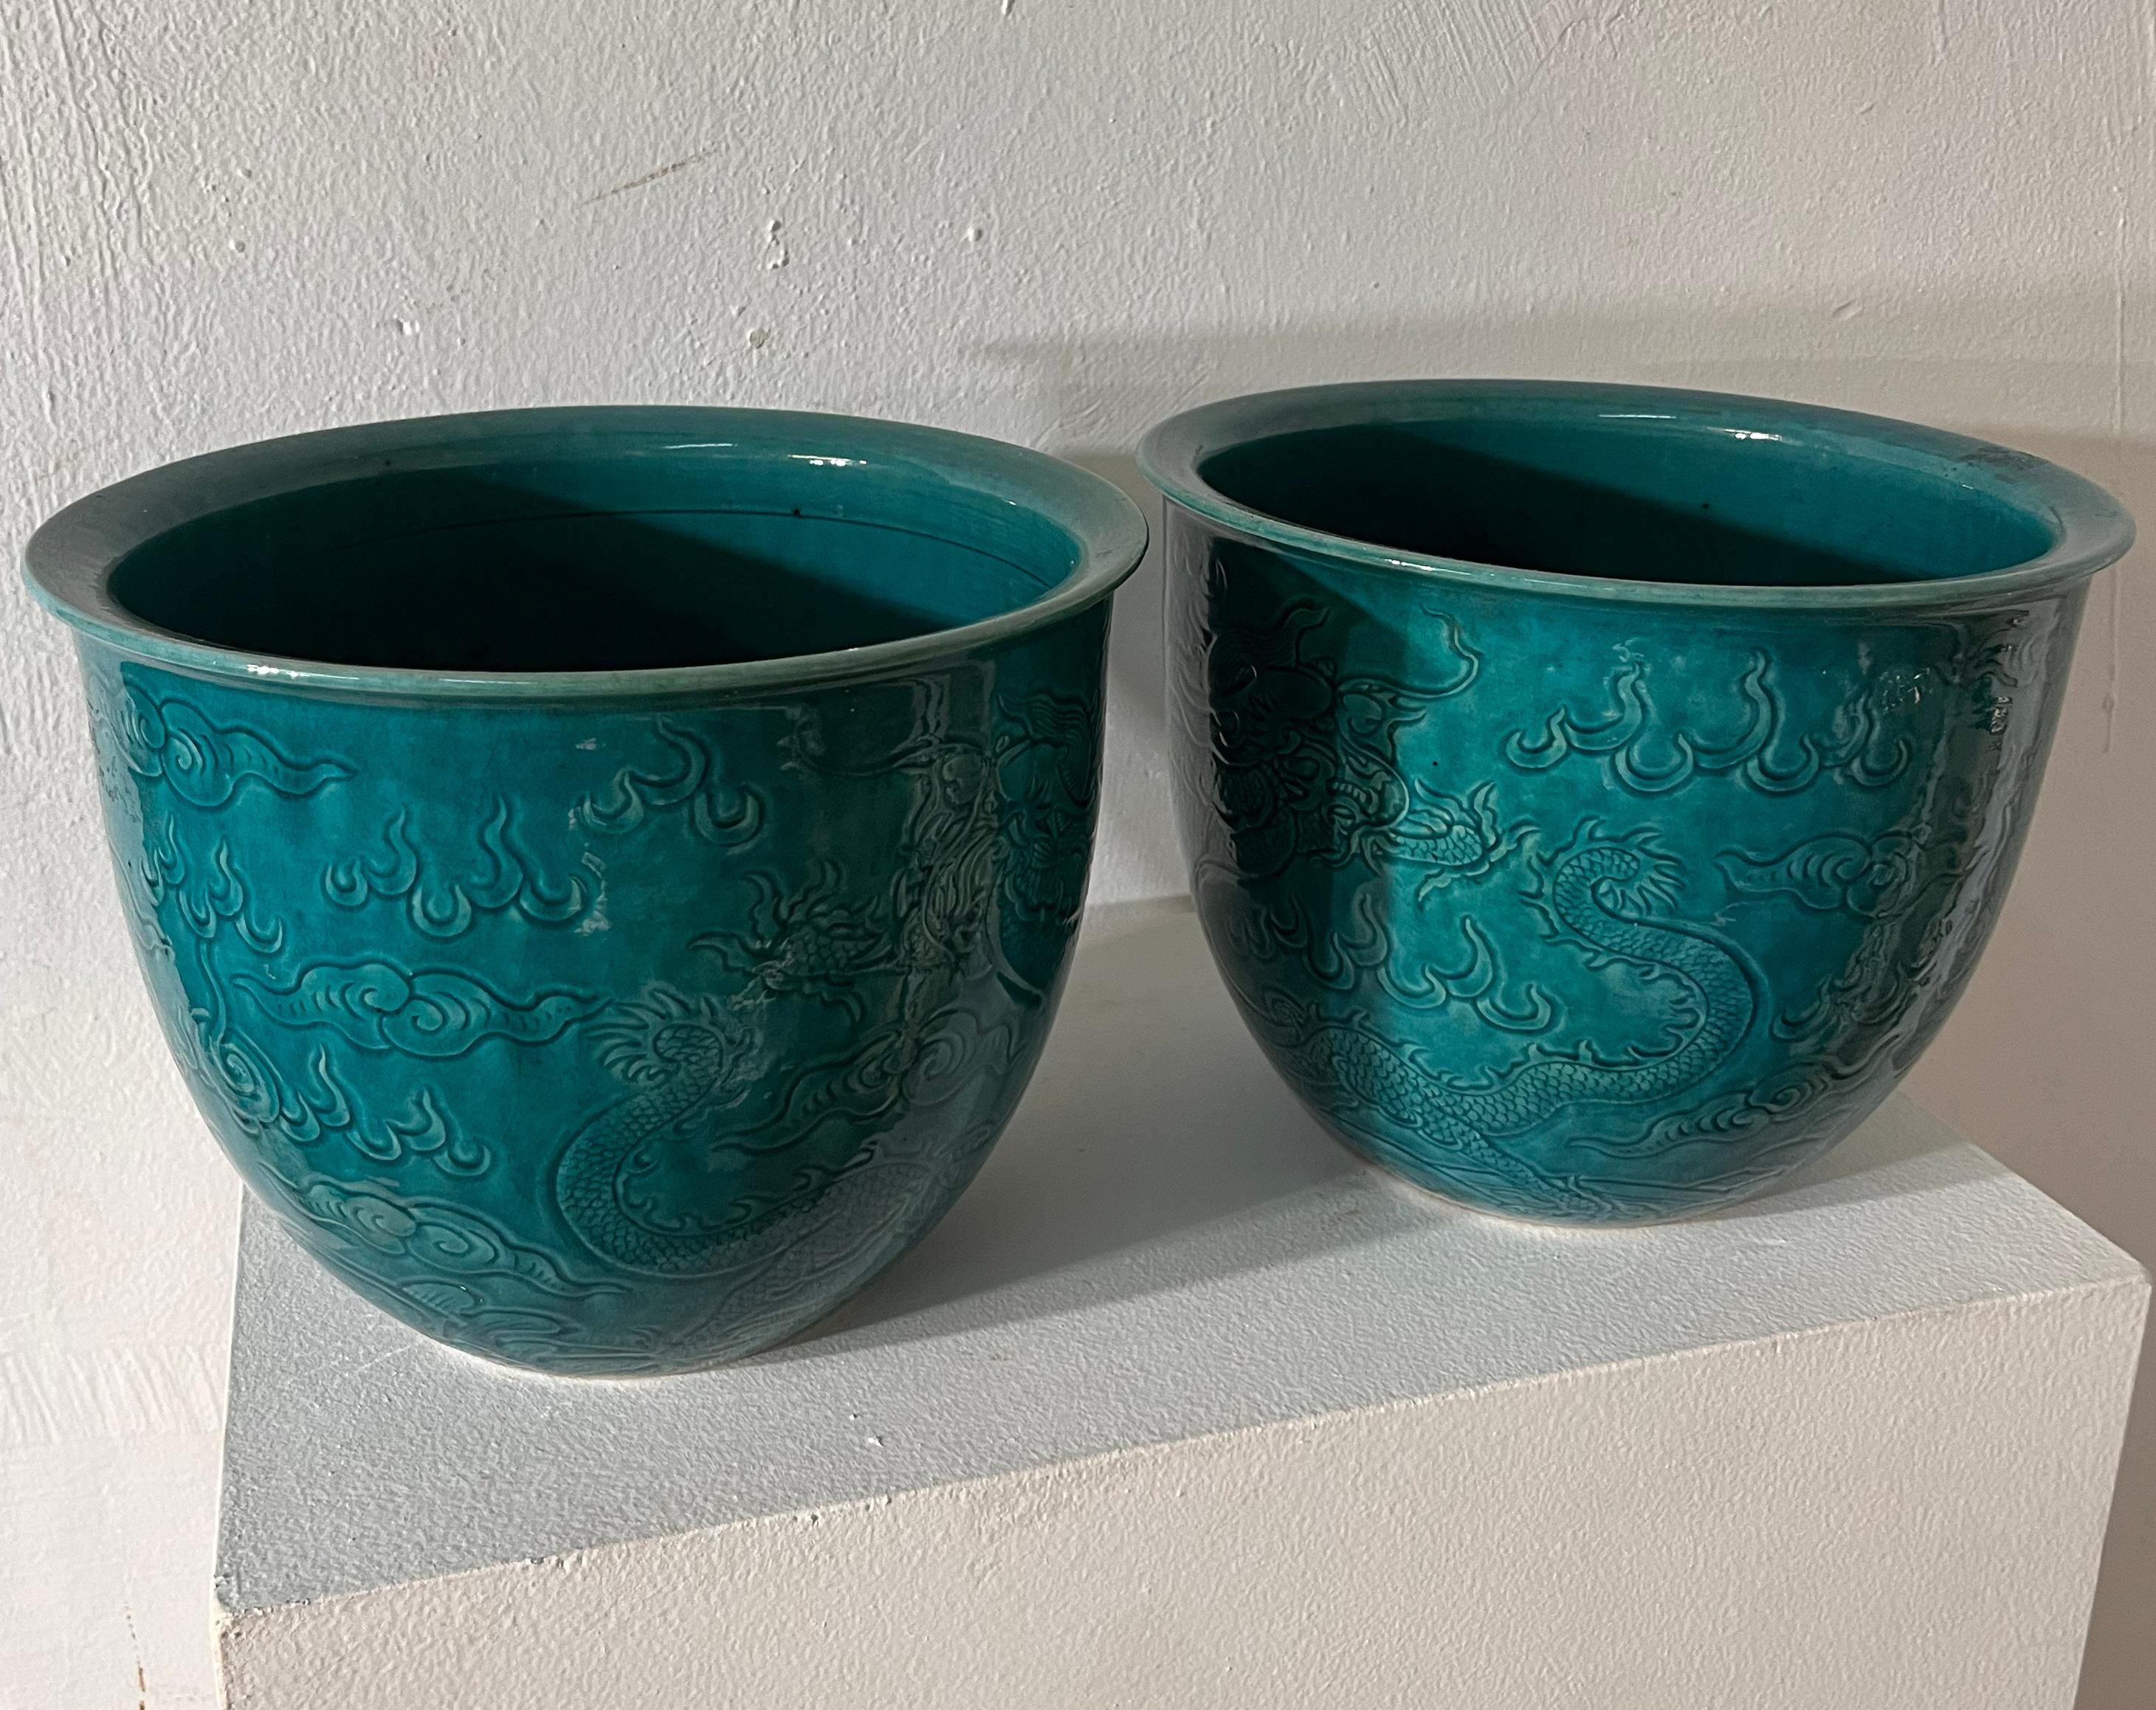 A turquoise glazed pair of jardiniere with incised five clawed dragons design,
China 19th century.
Small chips to the mouth rim.